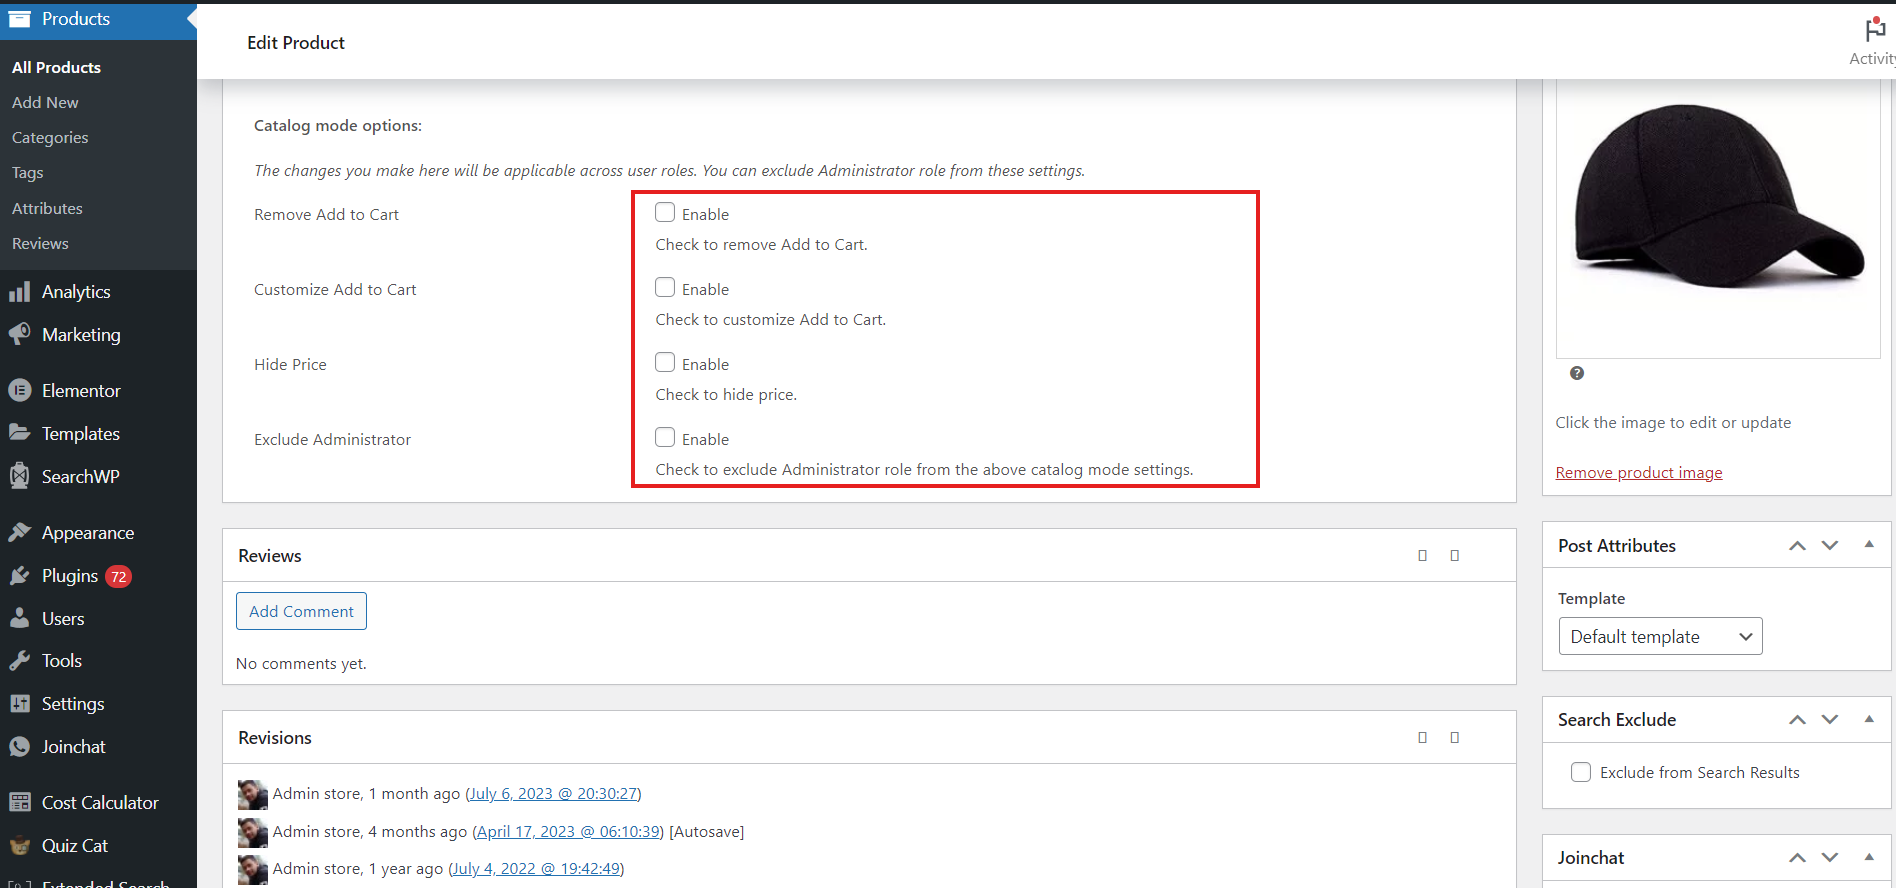 Customize the product specific Catalog Mode settings